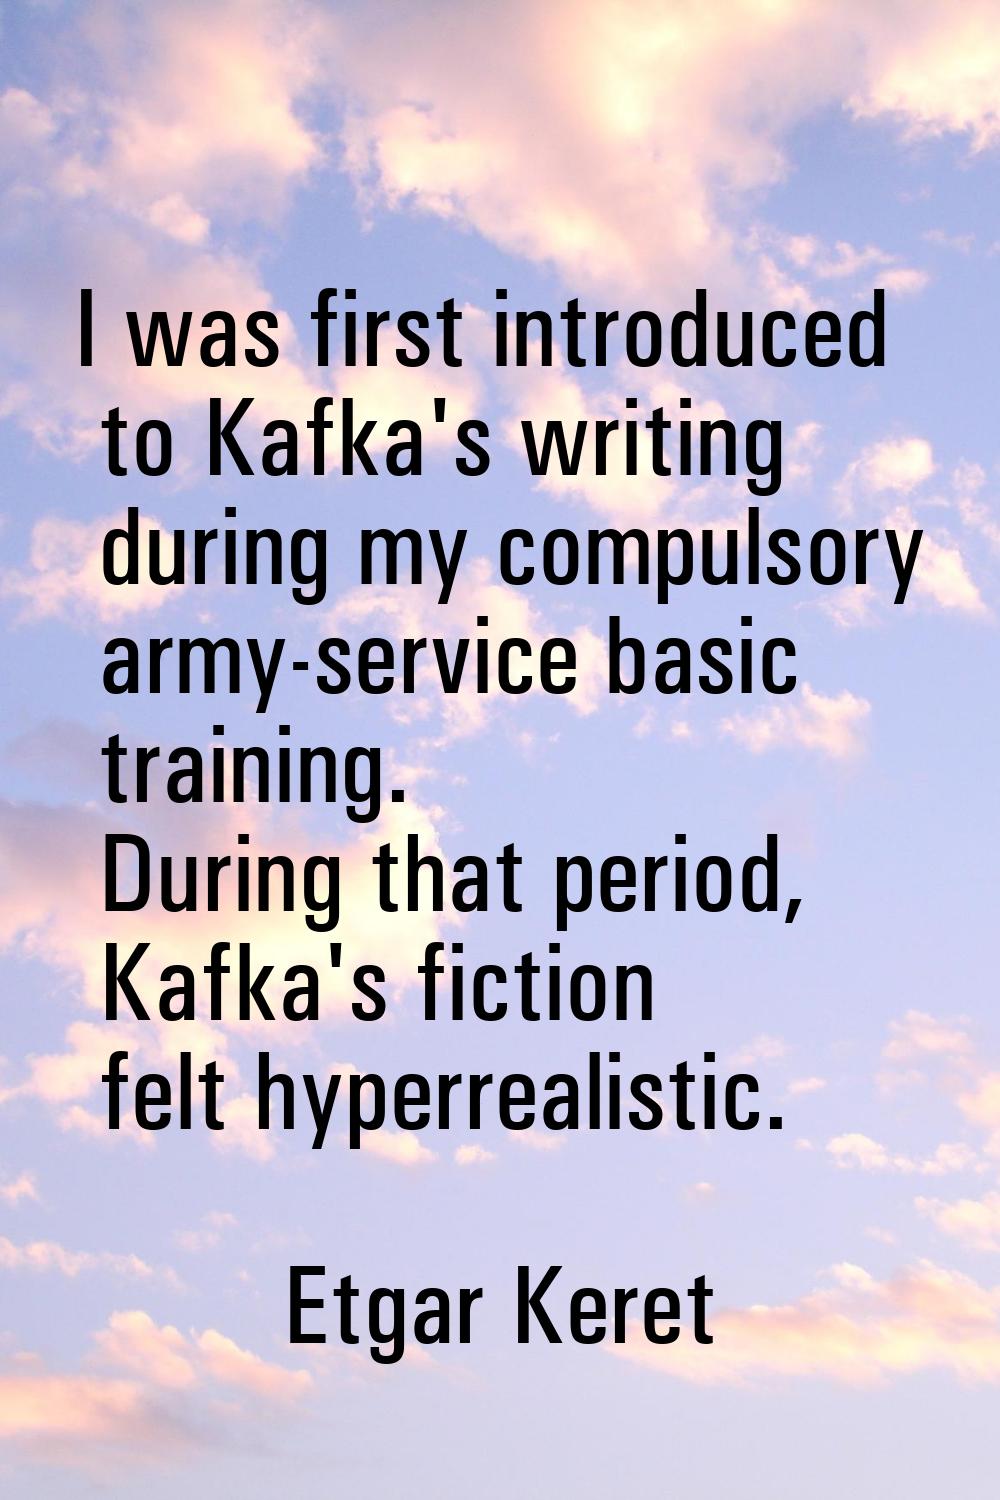 I was first introduced to Kafka's writing during my compulsory army-service basic training. During 